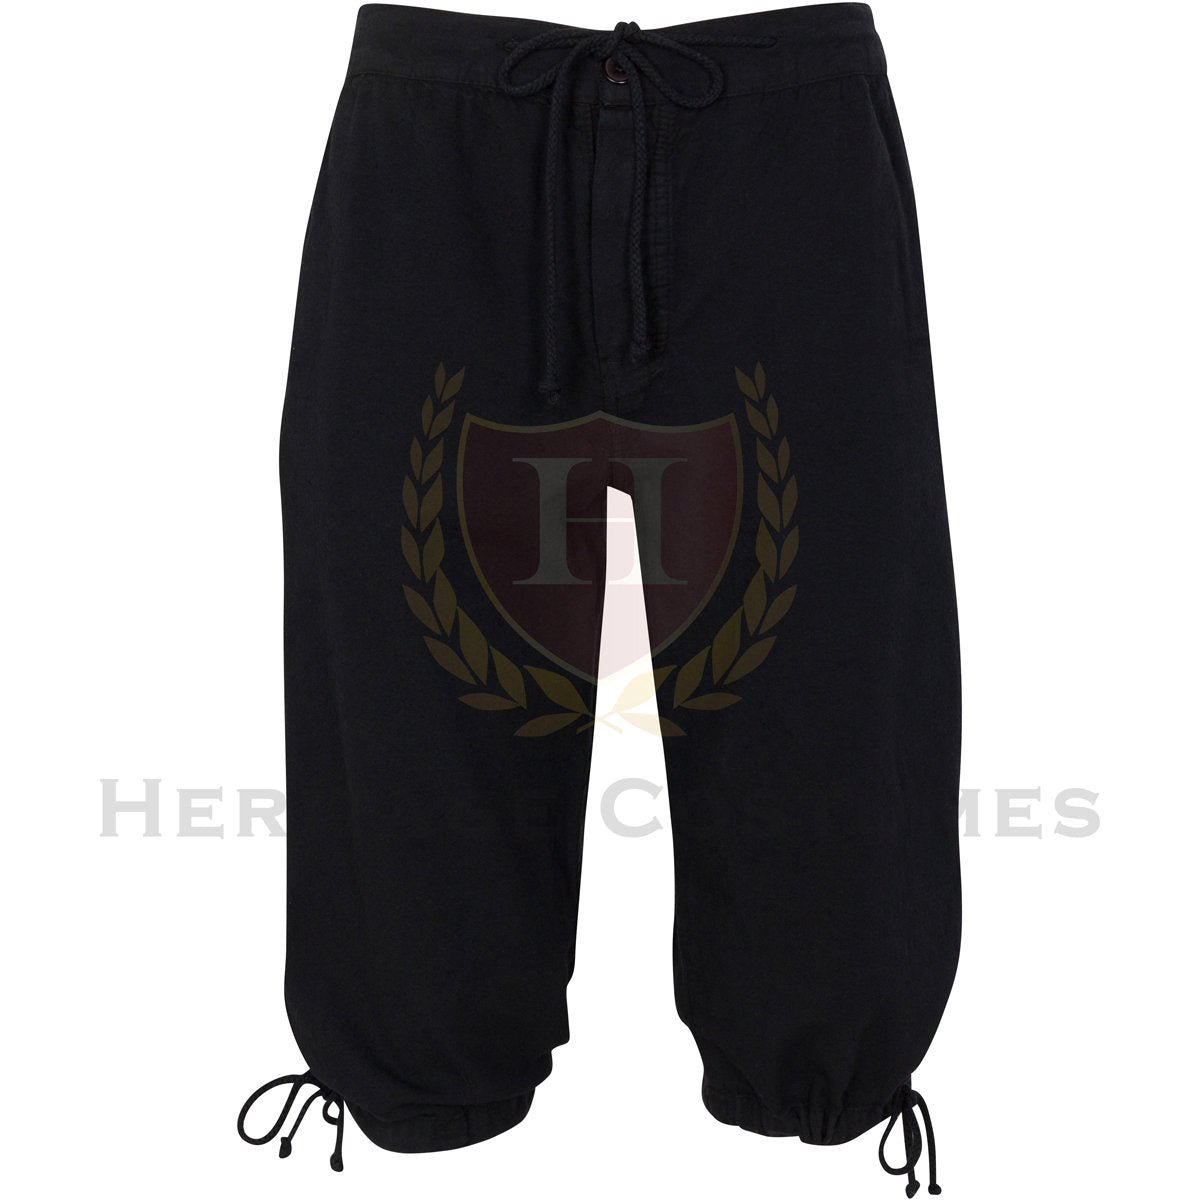 Pirate Breeches, Renassiance Pants, Medieval trousers